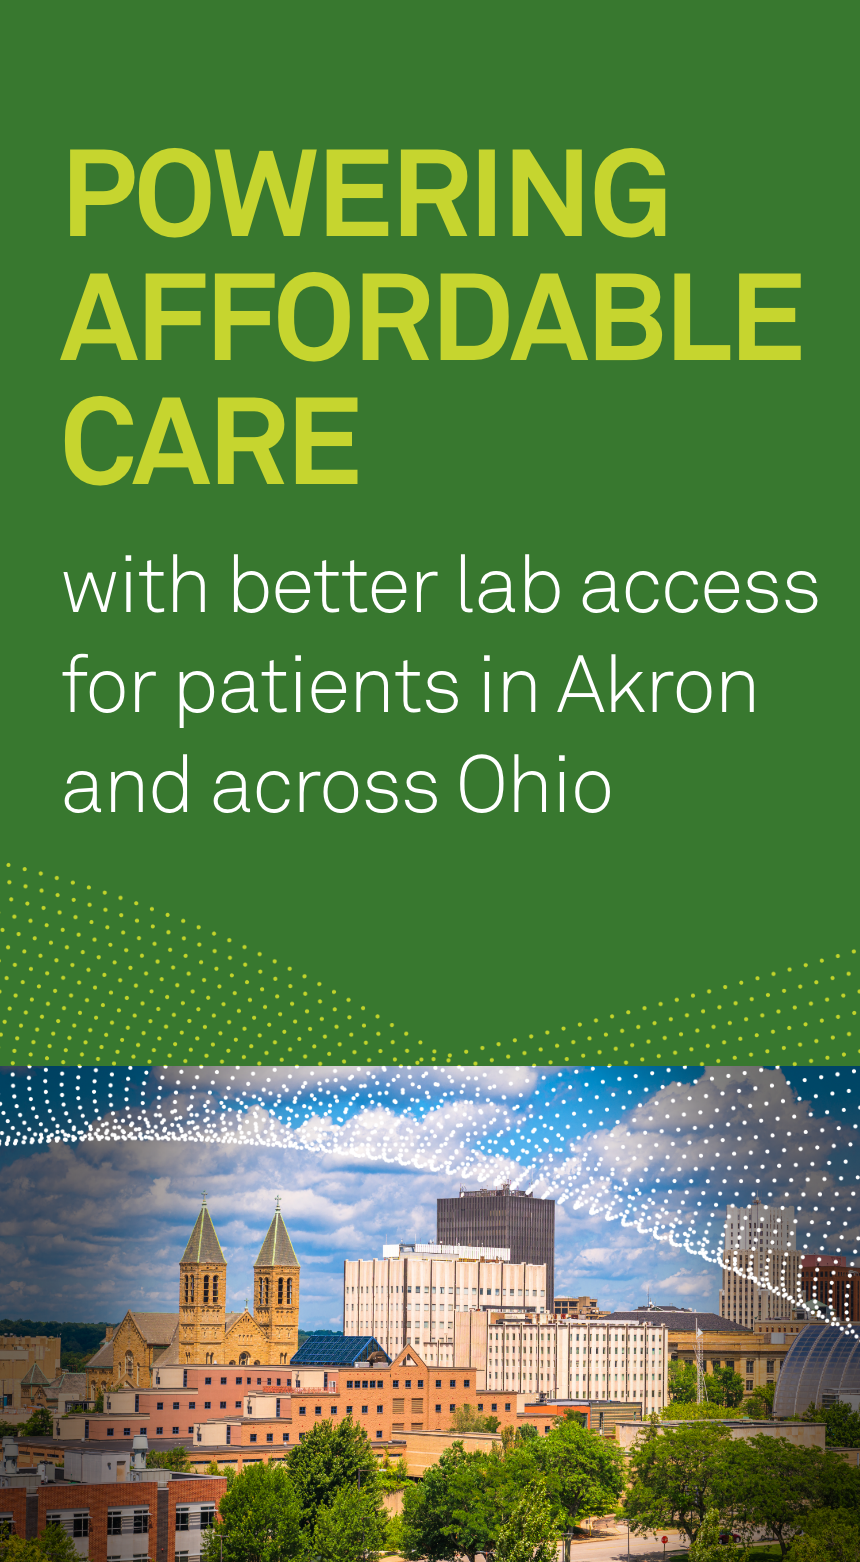 Powering affordable care with better lab access for patients in Akron and across Ohio